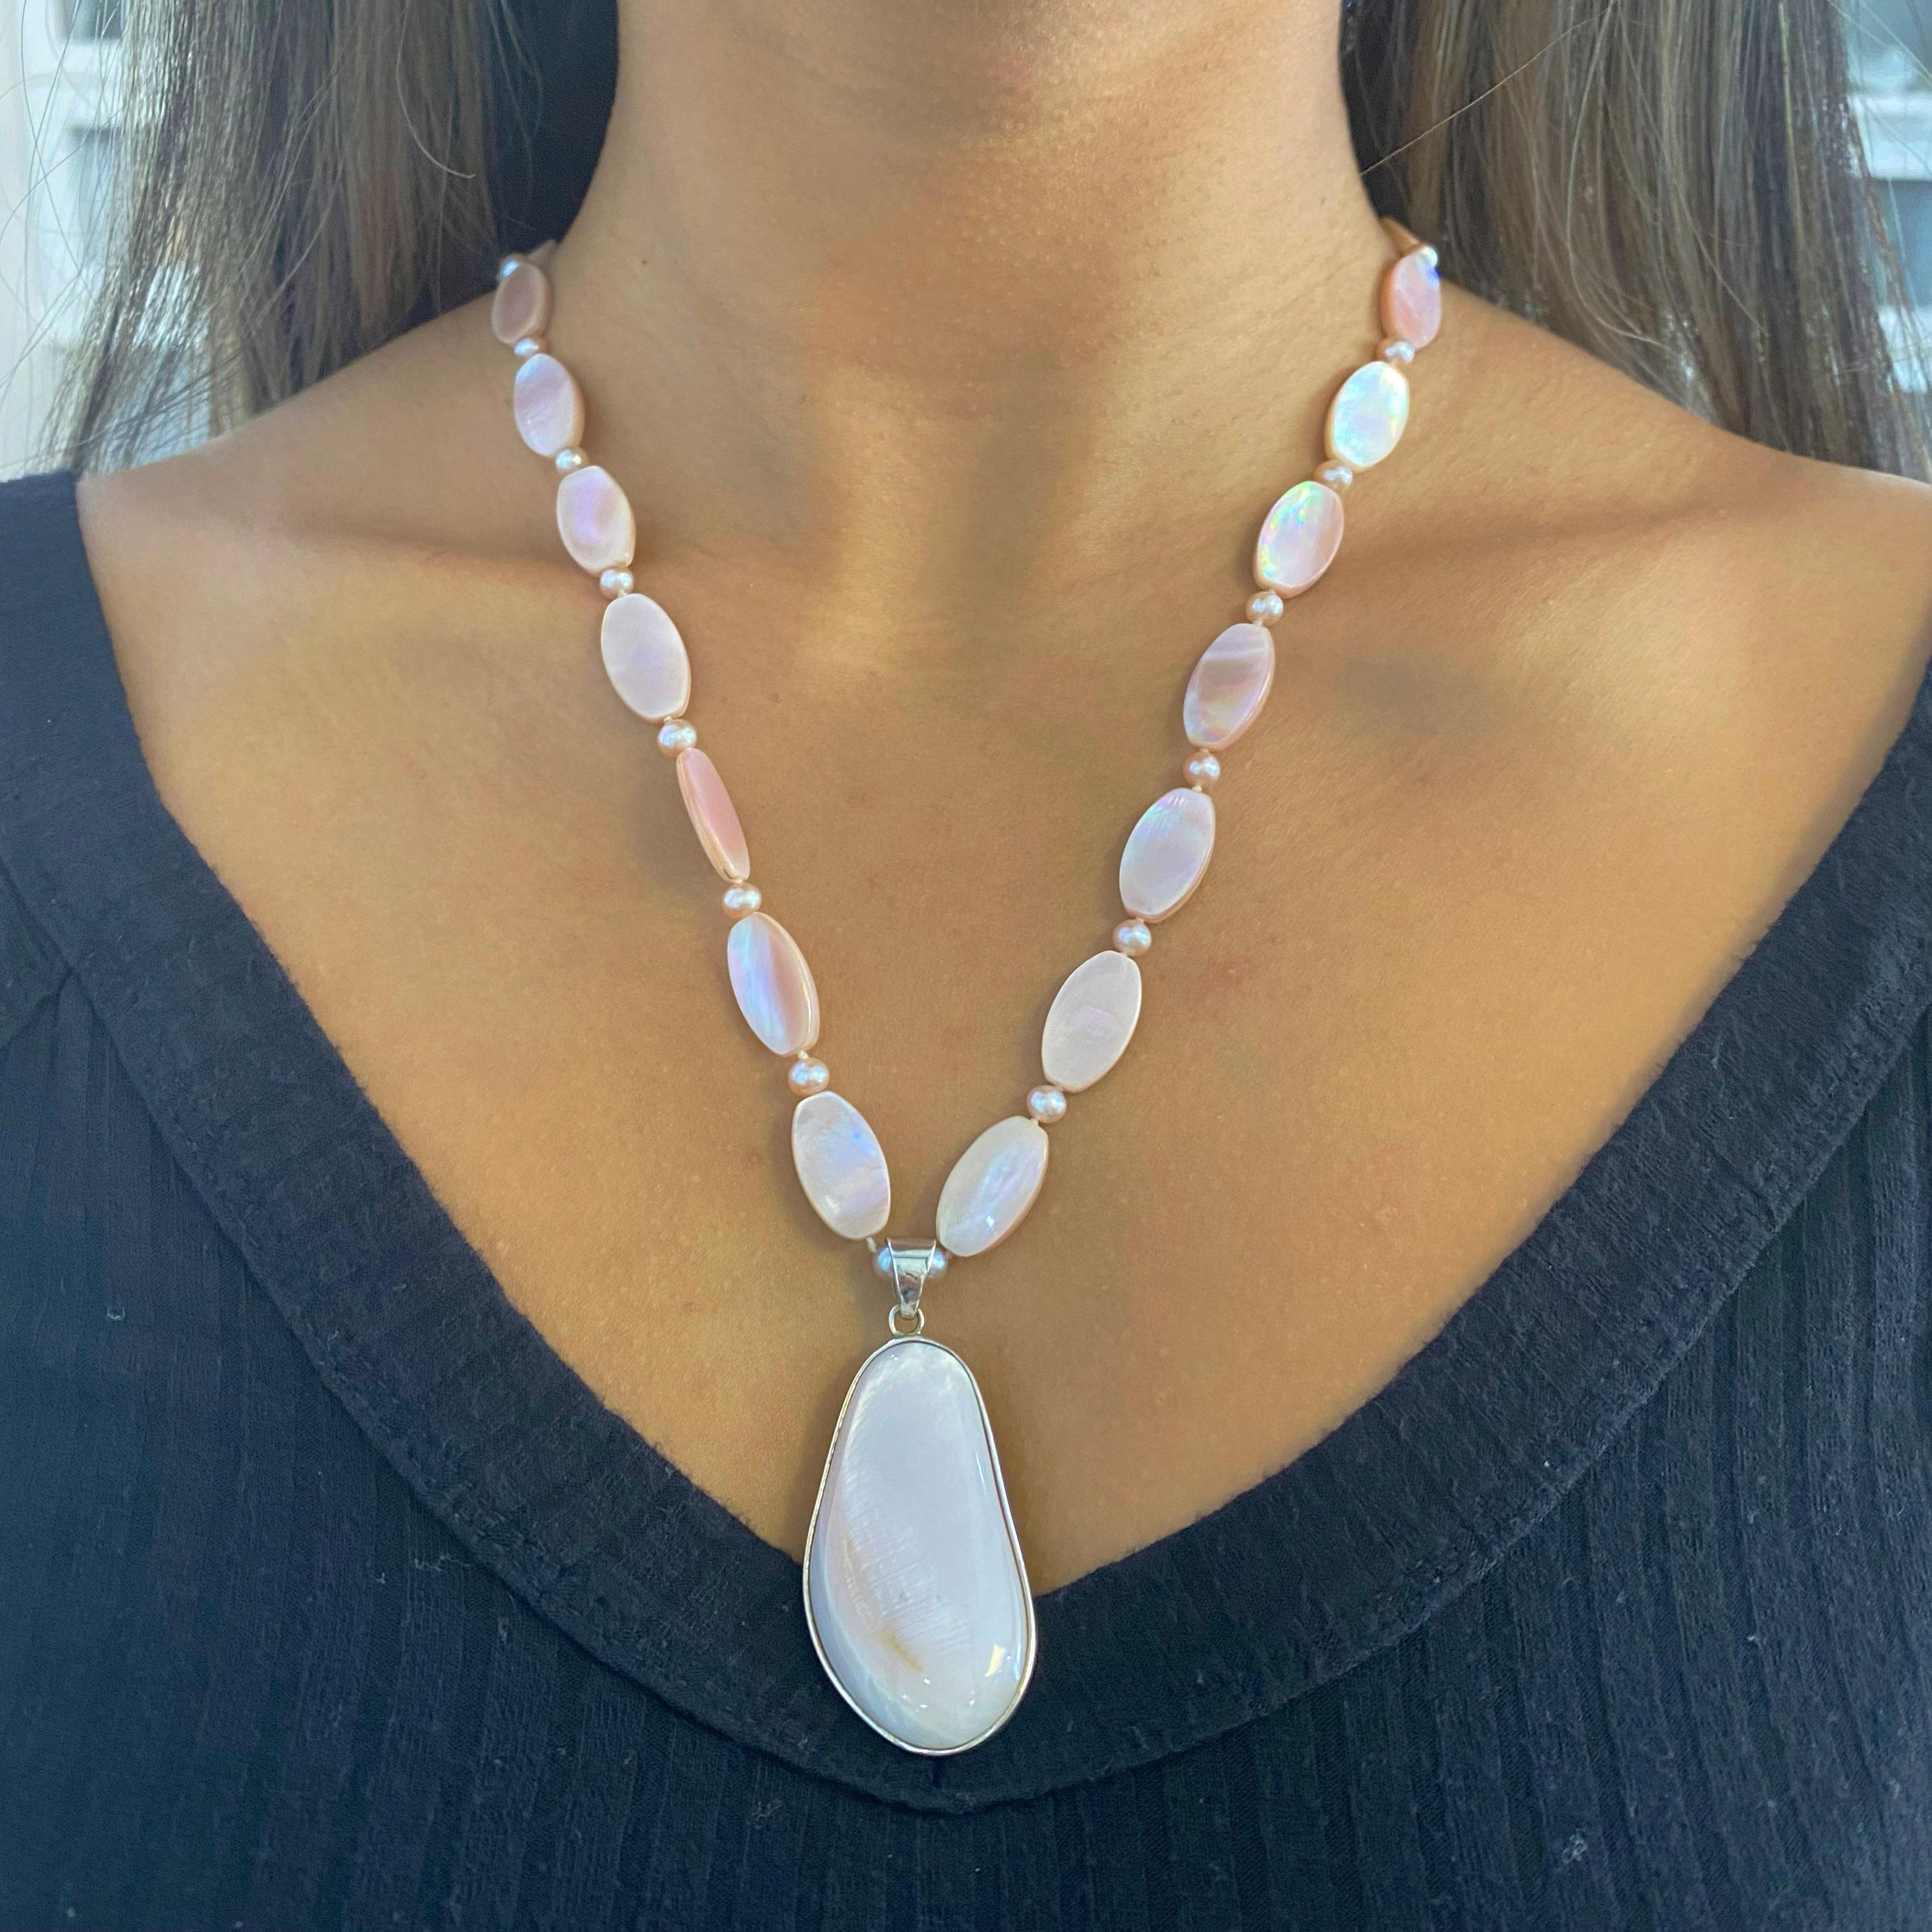 This is a Pink Mother-of-Pearl pendant necklace that is absolutely stunning. Mother of Pearl is a strong, resilient stone and it gives off an iridescent color. It is so easy to appreciate the shine and beautiful pink color of this necklace. The